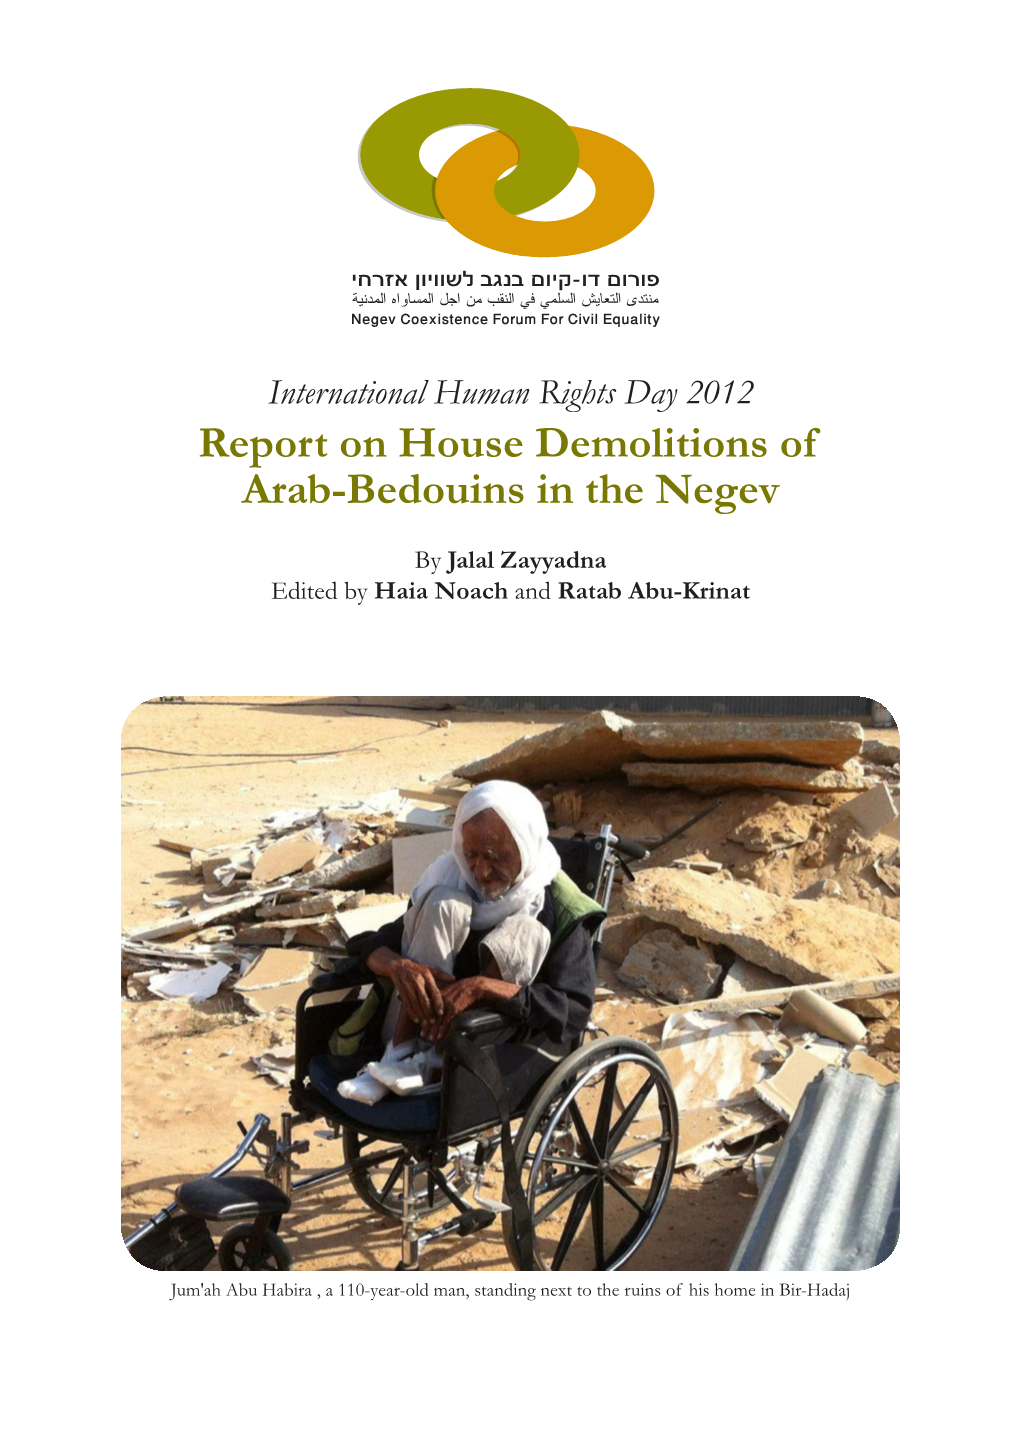 Report on House Demolitions of Arab-Bedouins in the Negev